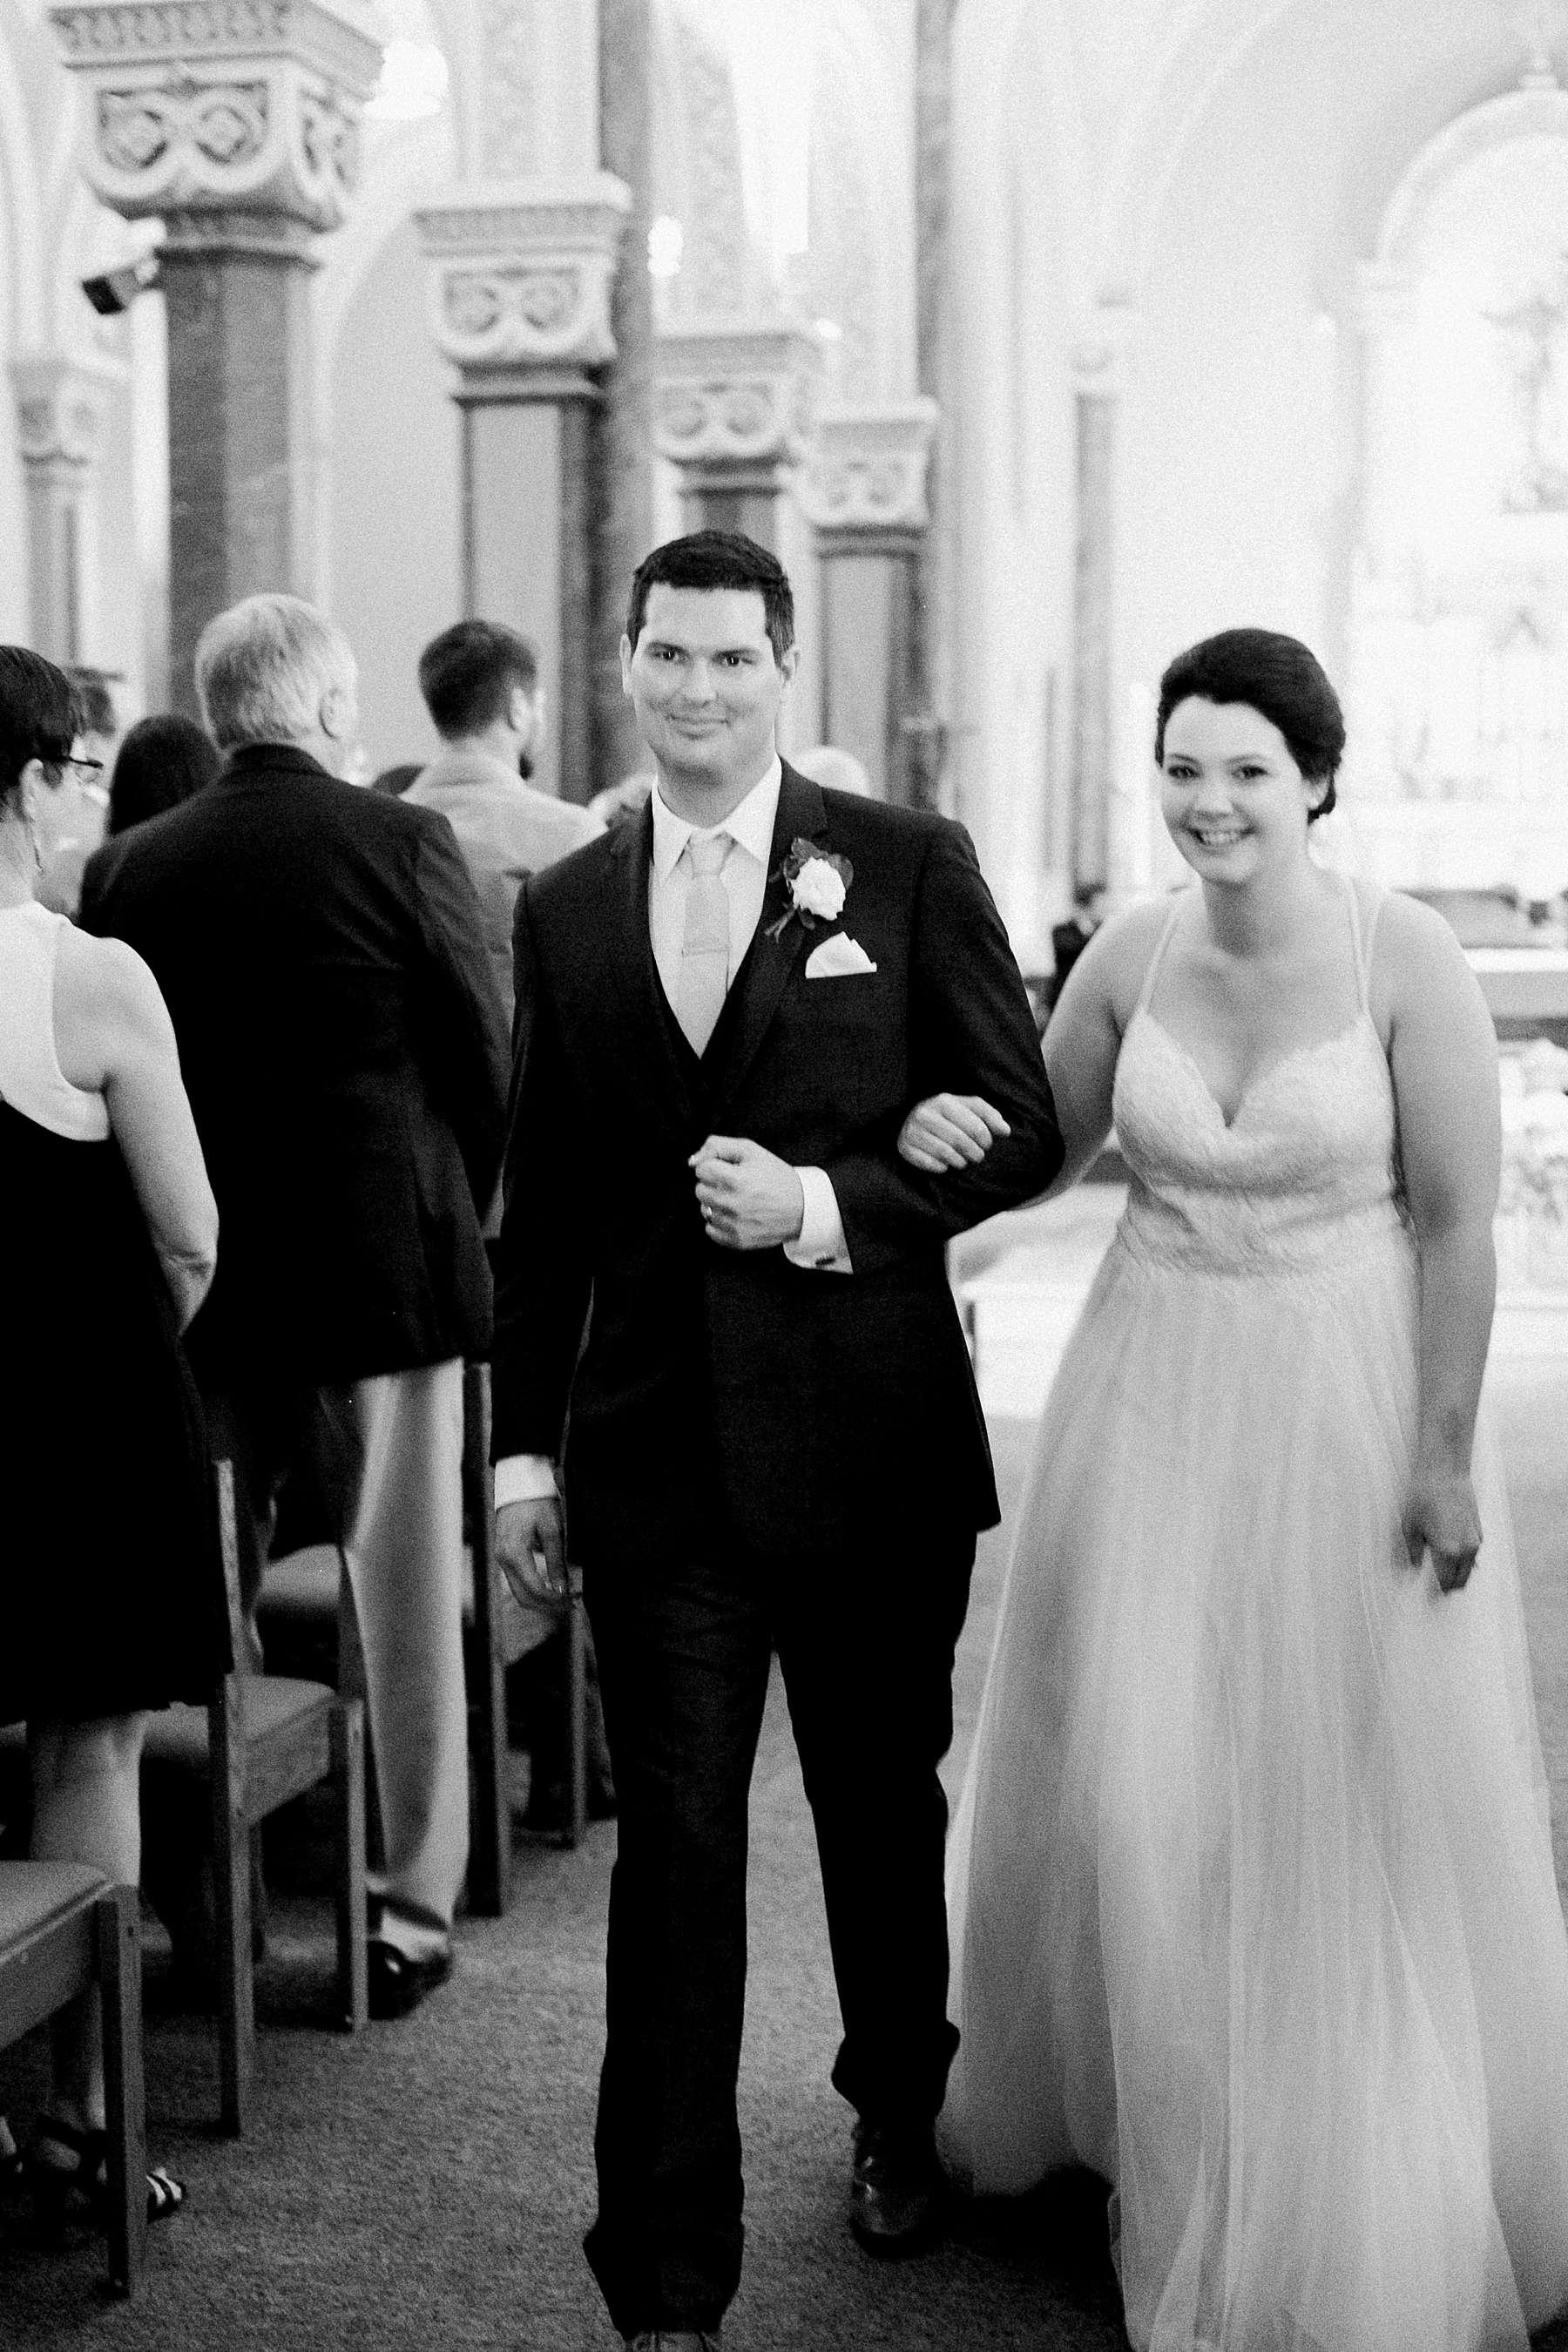 ceremony exit, romantic wedding at turner hall ballroom downtown milwaukee with milwaukee flower company, photo by laurelyn savannah photography